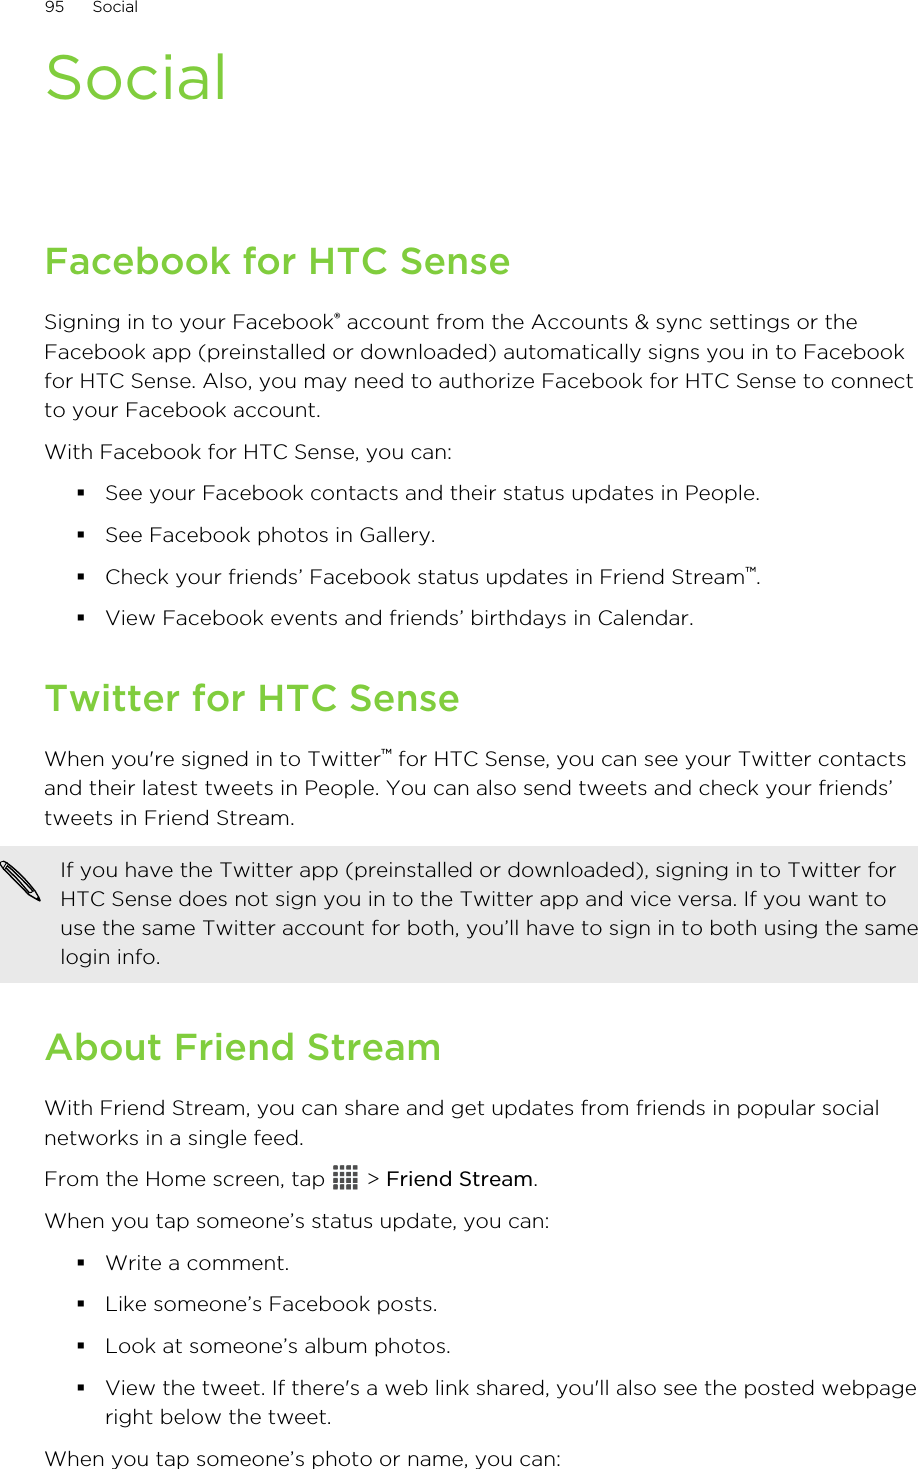 SocialFacebook for HTC SenseSigning in to your Facebook® account from the Accounts &amp; sync settings or theFacebook app (preinstalled or downloaded) automatically signs you in to Facebookfor HTC Sense. Also, you may need to authorize Facebook for HTC Sense to connectto your Facebook account.With Facebook for HTC Sense, you can:§See your Facebook contacts and their status updates in People.§See Facebook photos in Gallery.§Check your friends’ Facebook status updates in Friend Stream™.§View Facebook events and friends’ birthdays in Calendar.Twitter for HTC SenseWhen you&apos;re signed in to Twitter™ for HTC Sense, you can see your Twitter contactsand their latest tweets in People. You can also send tweets and check your friends’tweets in Friend Stream.If you have the Twitter app (preinstalled or downloaded), signing in to Twitter forHTC Sense does not sign you in to the Twitter app and vice versa. If you want touse the same Twitter account for both, you’ll have to sign in to both using the samelogin info.About Friend StreamWith Friend Stream, you can share and get updates from friends in popular socialnetworks in a single feed.From the Home screen, tap   &gt; Friend Stream.When you tap someone’s status update, you can:§Write a comment.§Like someone’s Facebook posts.§Look at someone’s album photos.§View the tweet. If there&apos;s a web link shared, you&apos;ll also see the posted webpageright below the tweet.When you tap someone’s photo or name, you can:95 Social